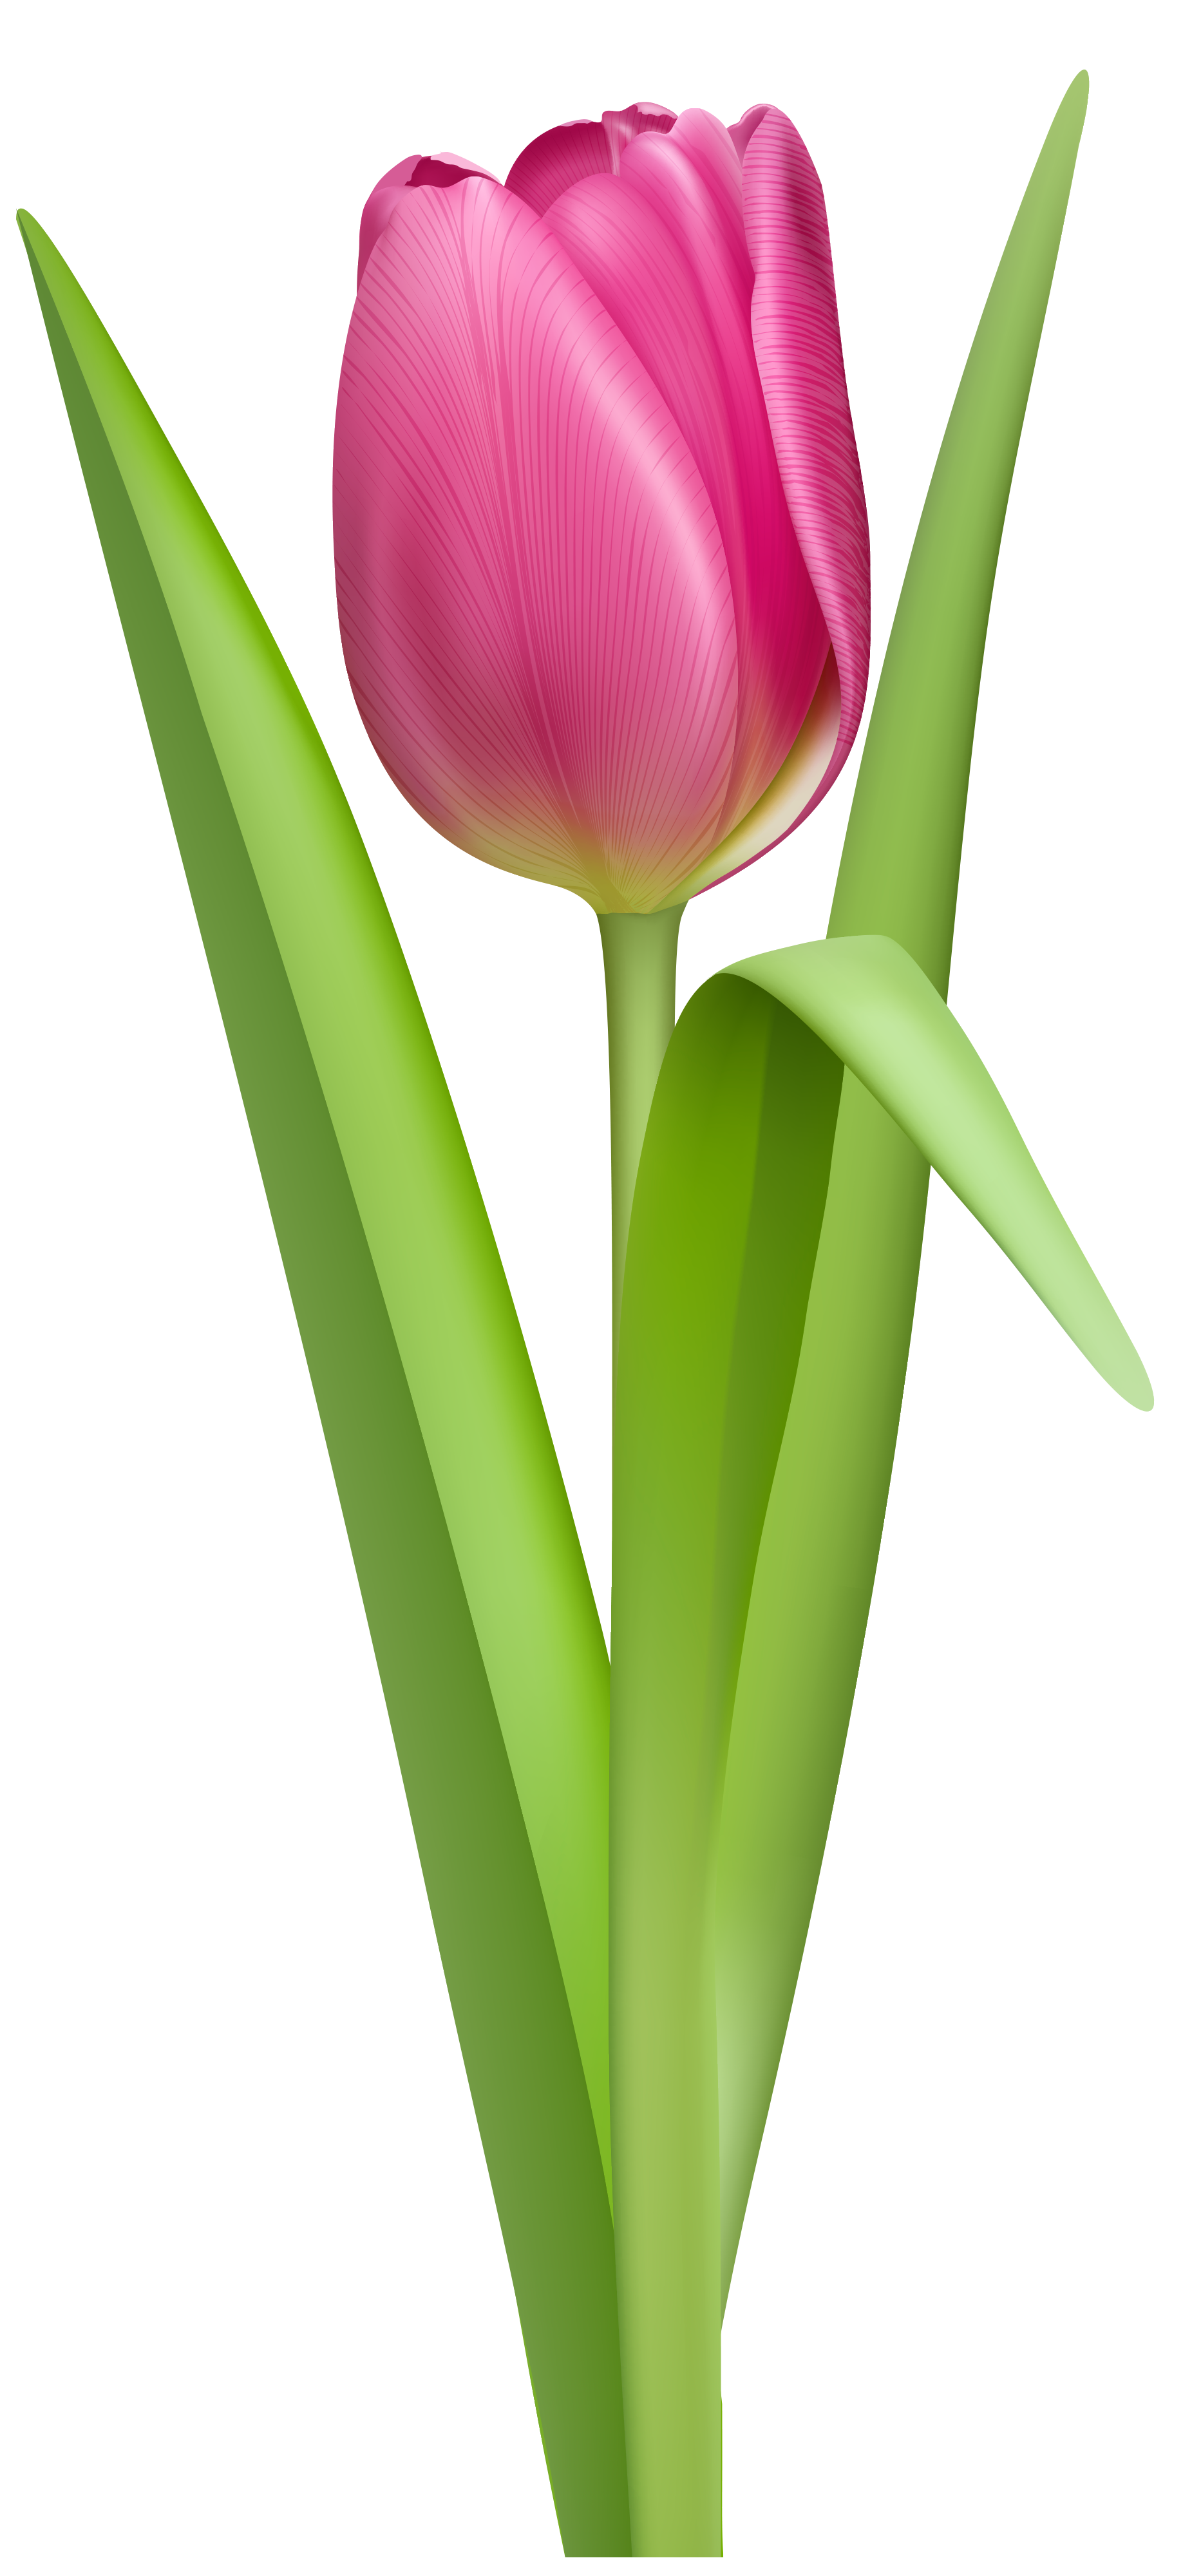 Leaves clipart tulip, Leaves tulip Transparent FREE for ...